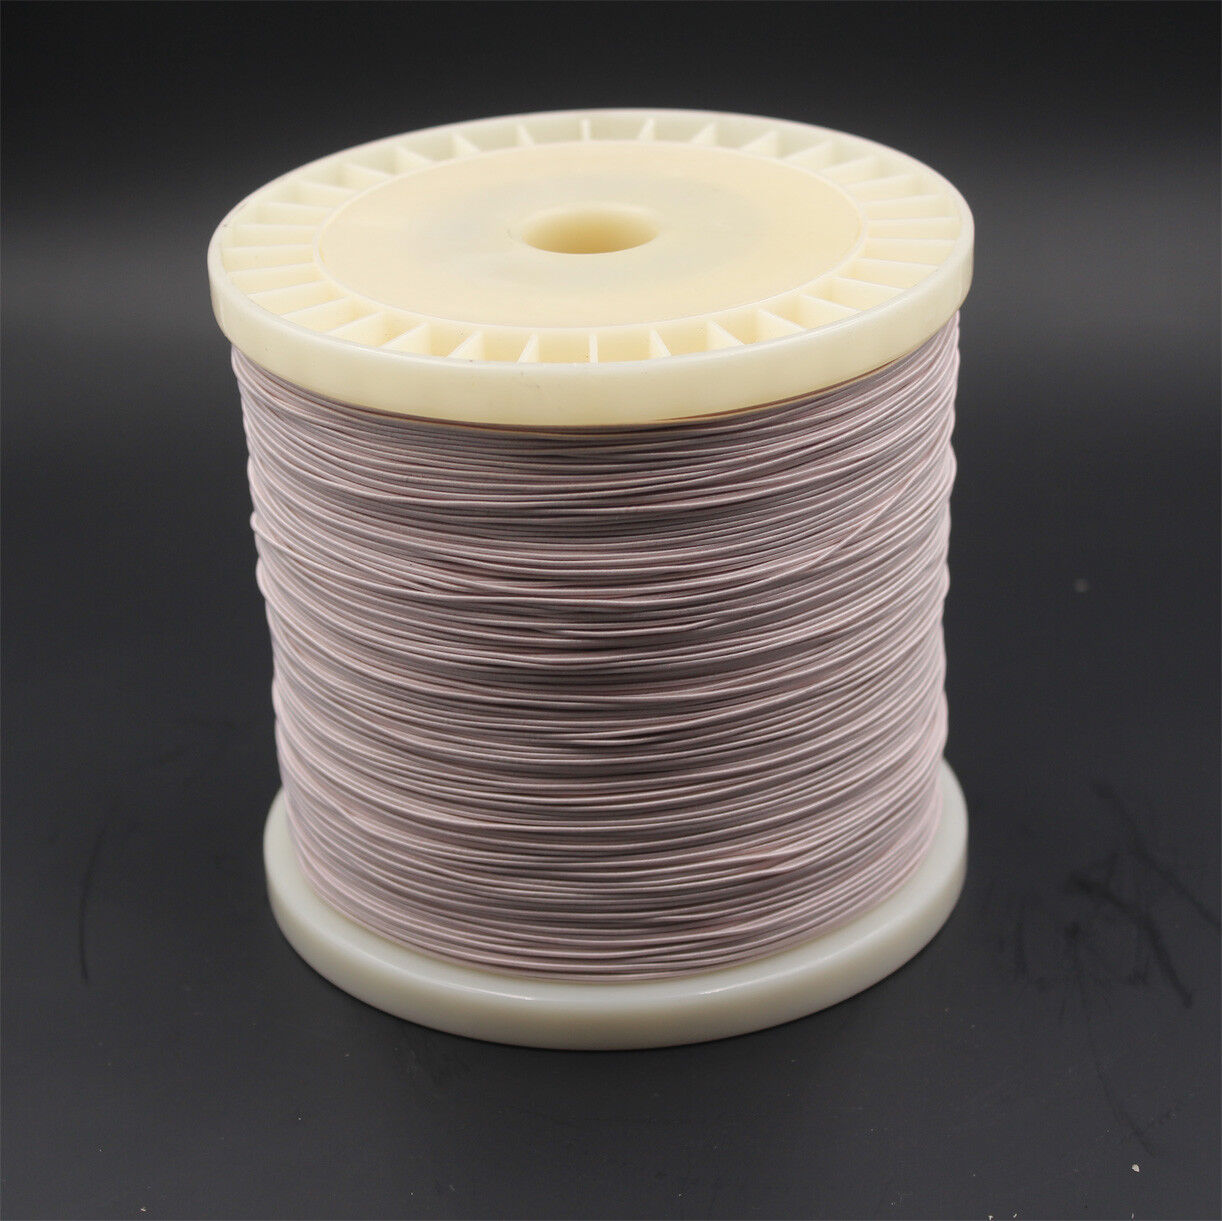 10m (33ft) Litz wire, 0.05mm x 120 strands, for crystal radio coil, 120/44